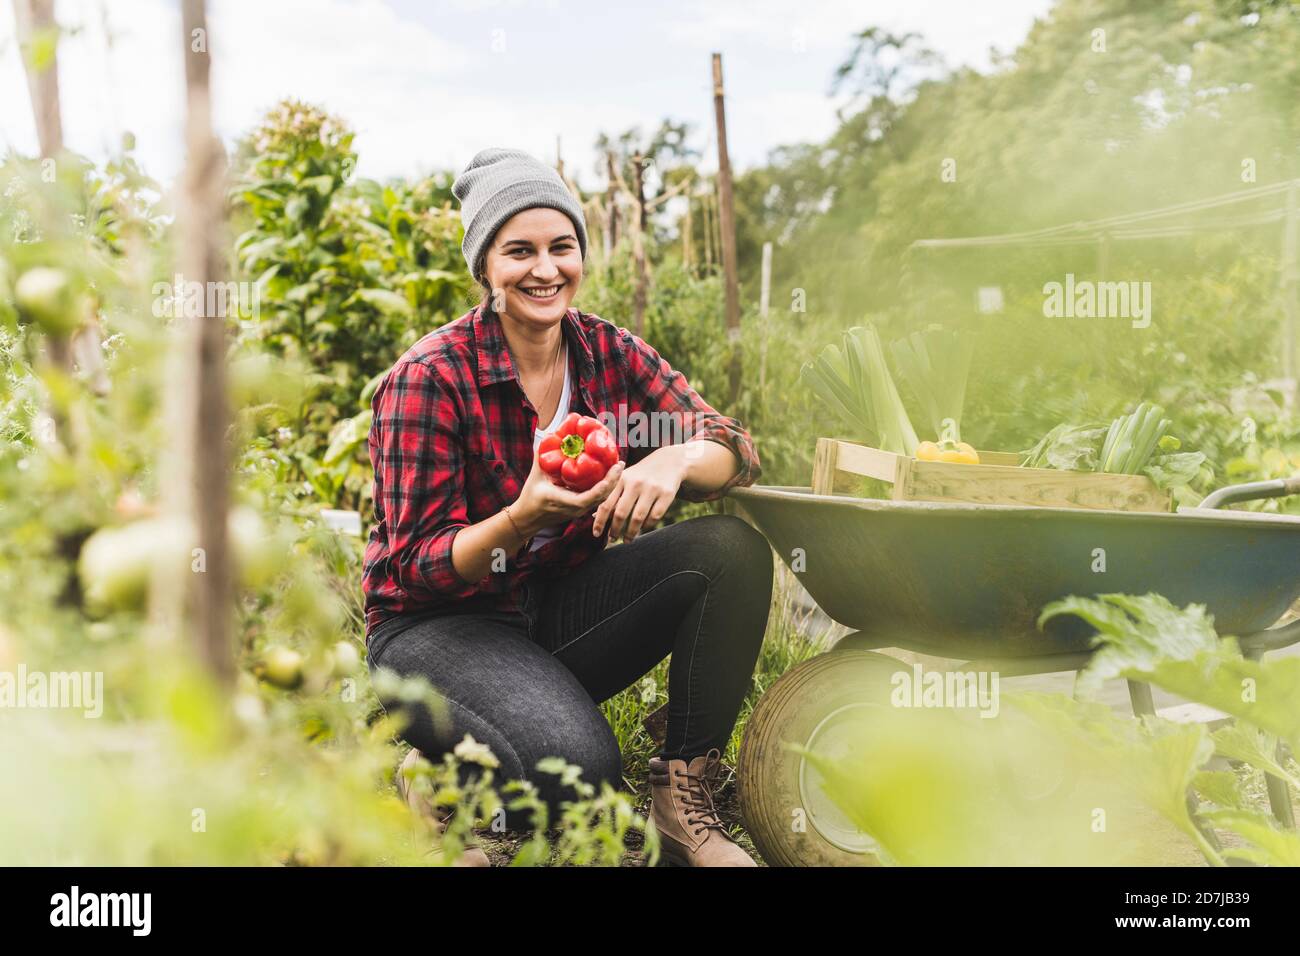 Smiling woman holding red bell pepper while crouching by wheelbarrow in vegetable garden Stock Photo